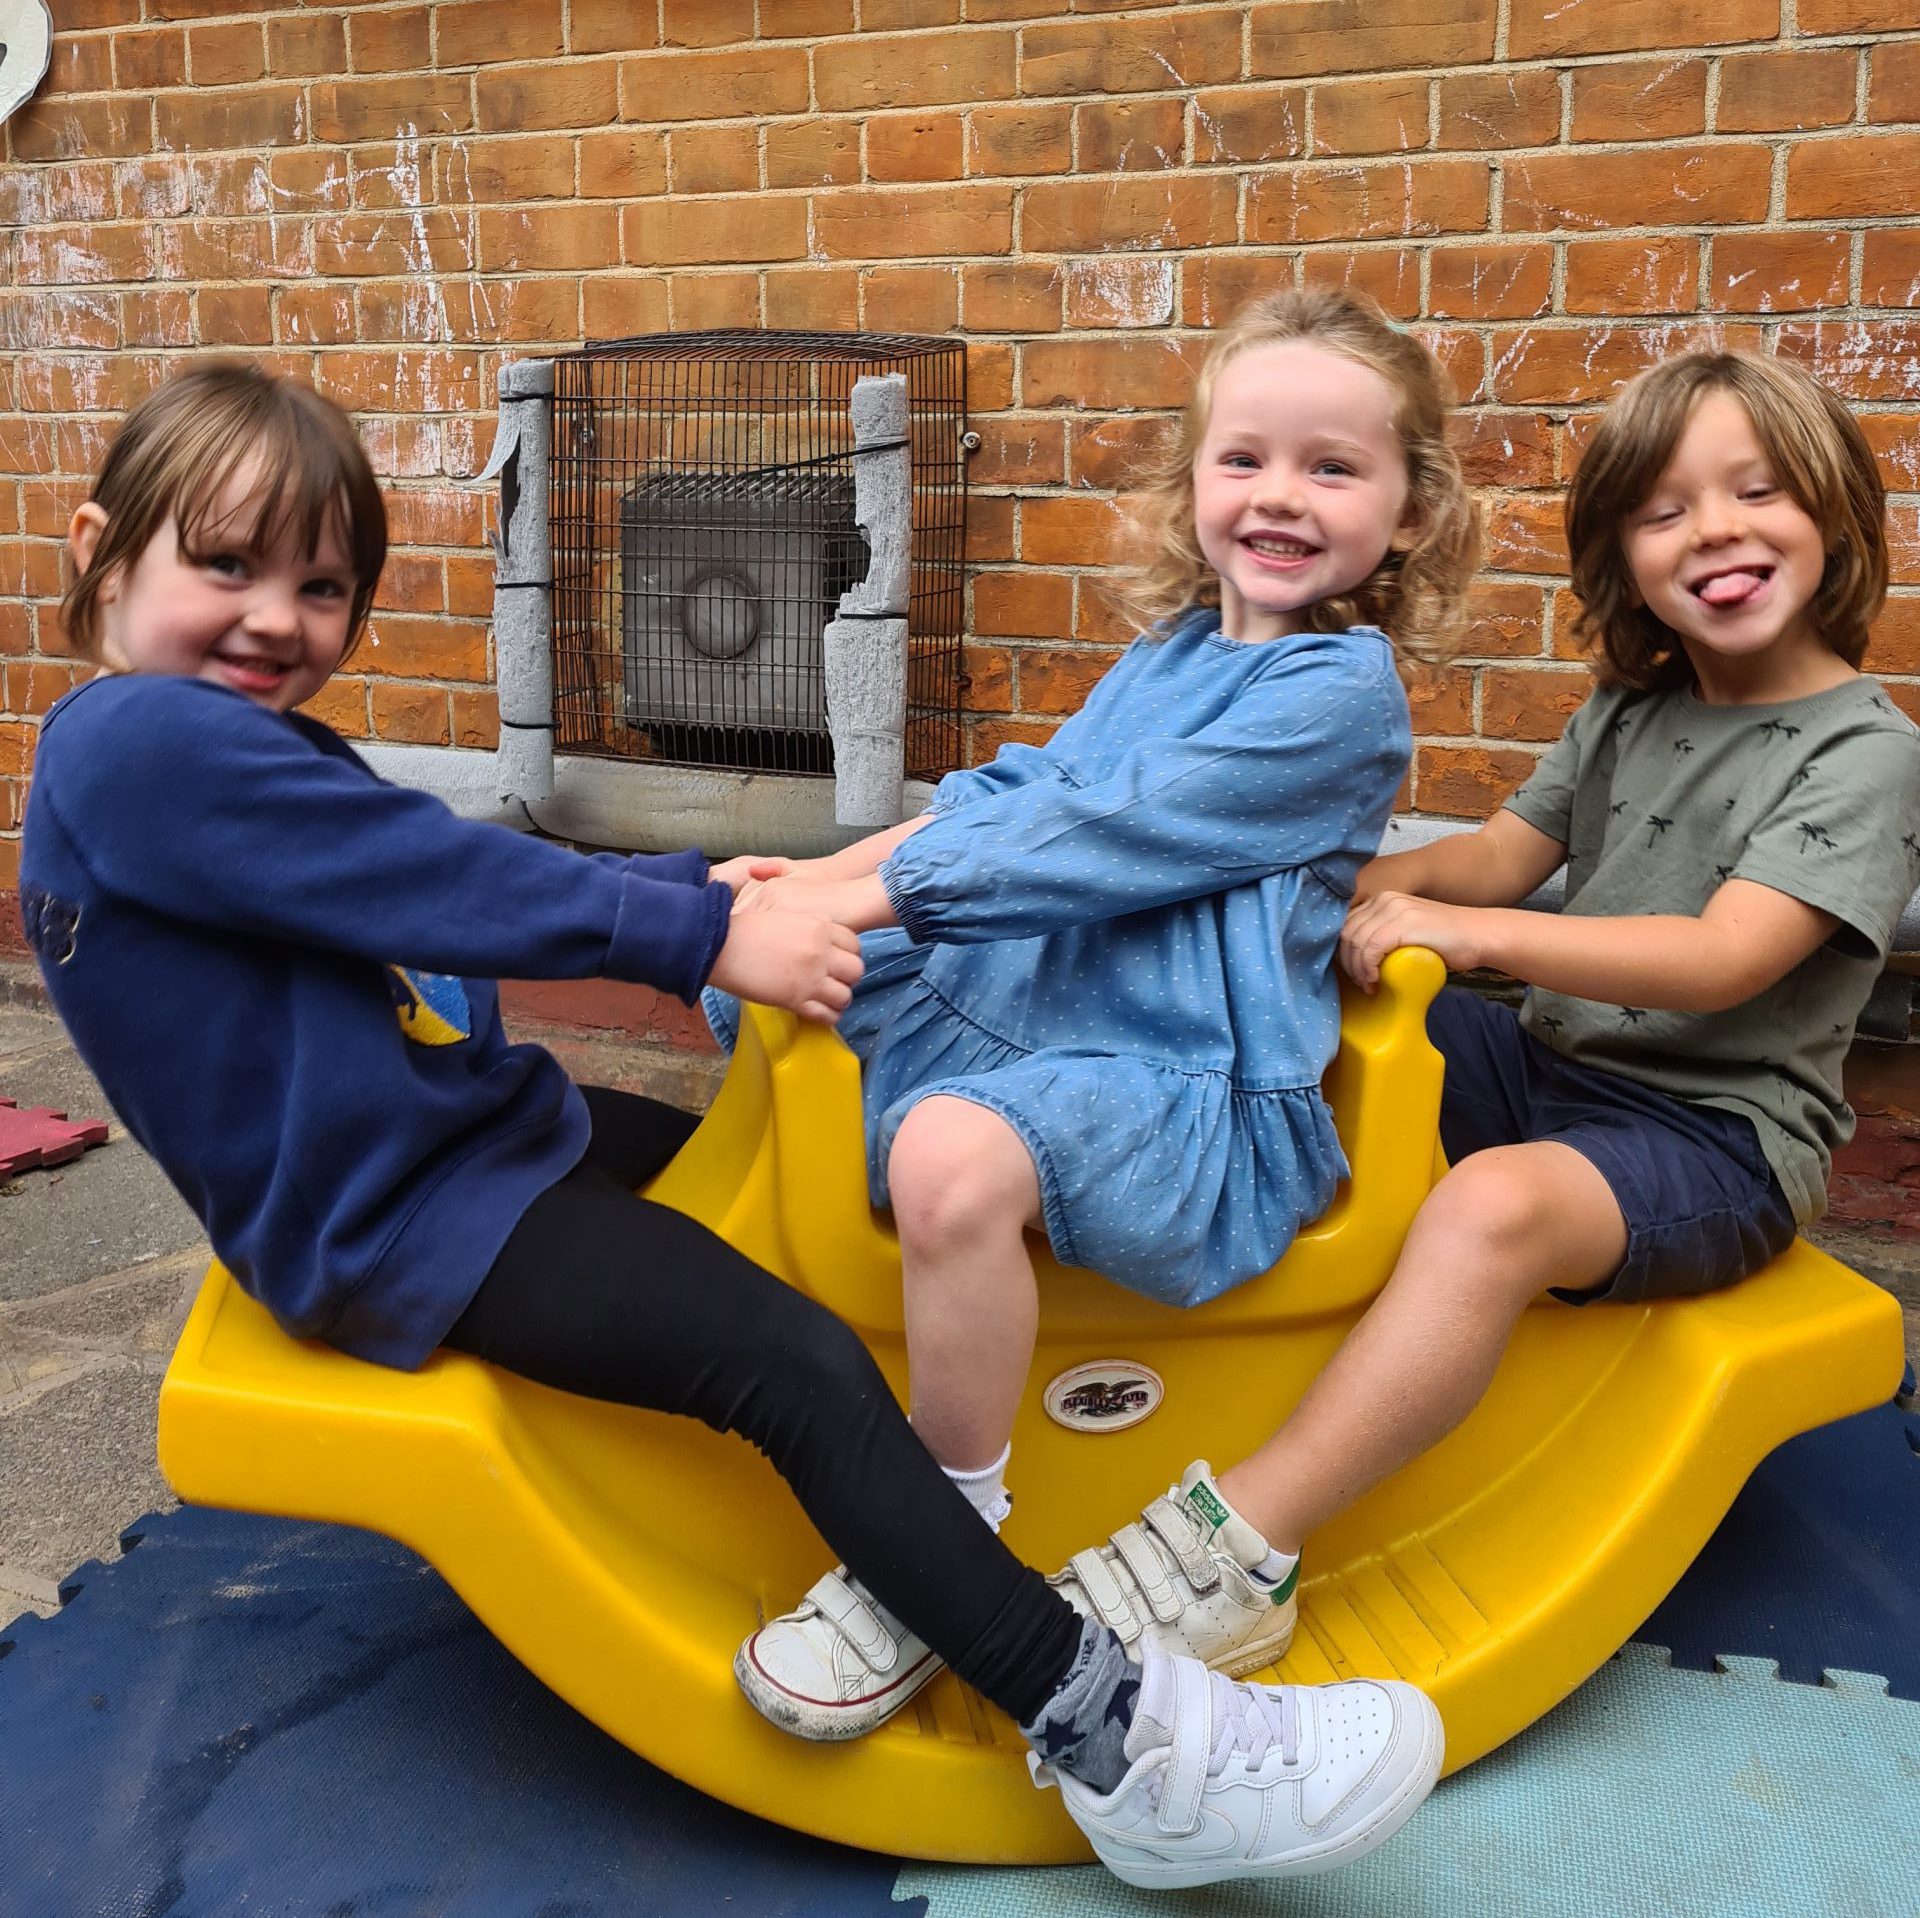 All smiles on the seesaw!